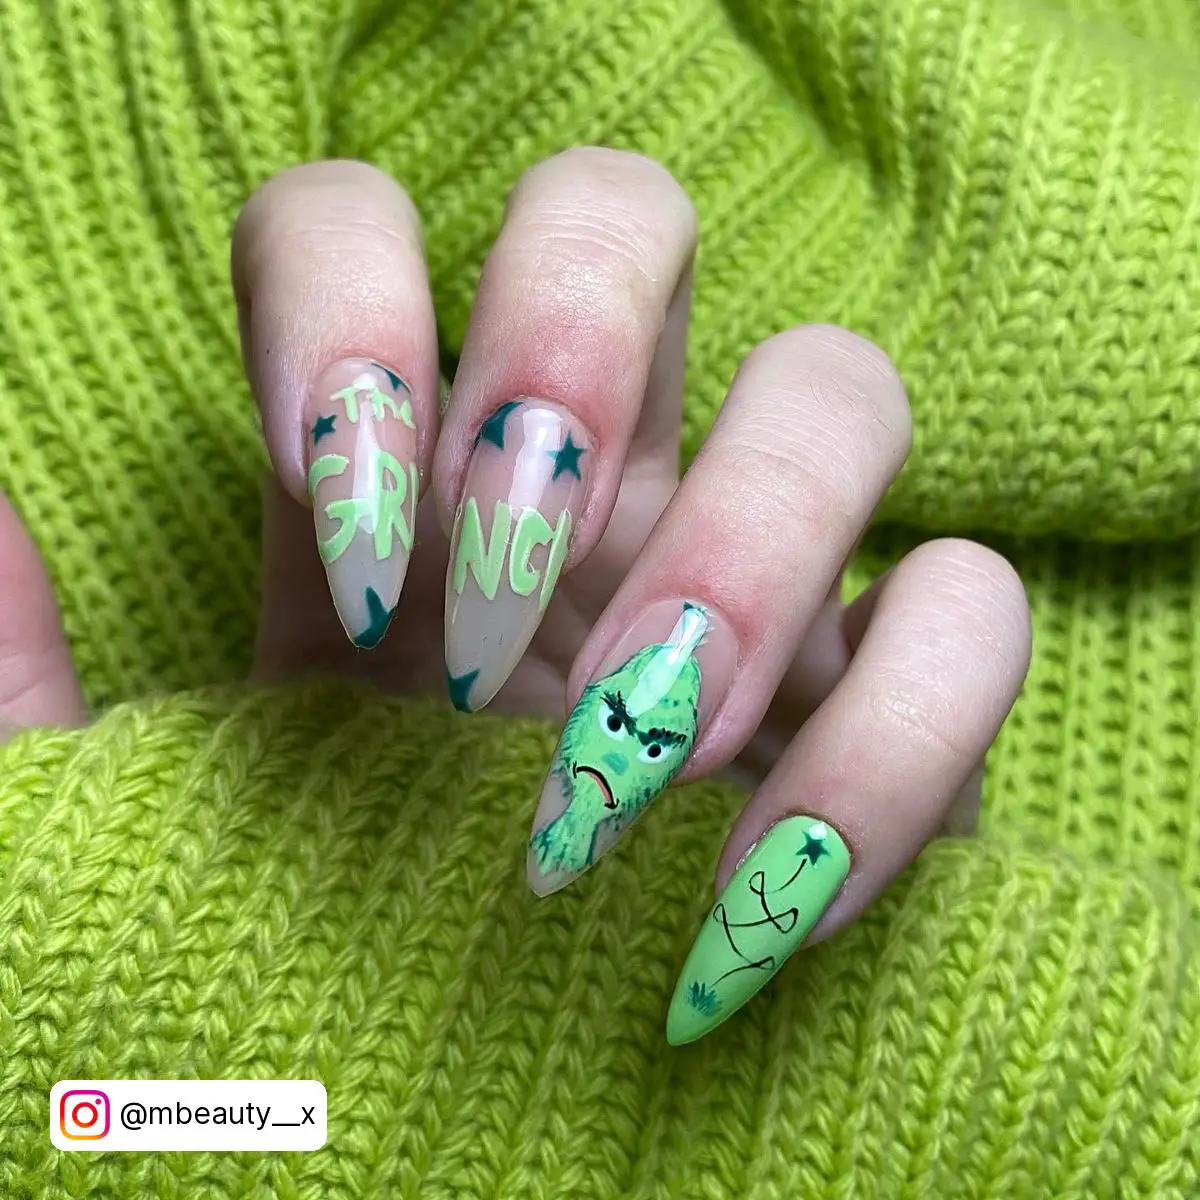 green almond nails